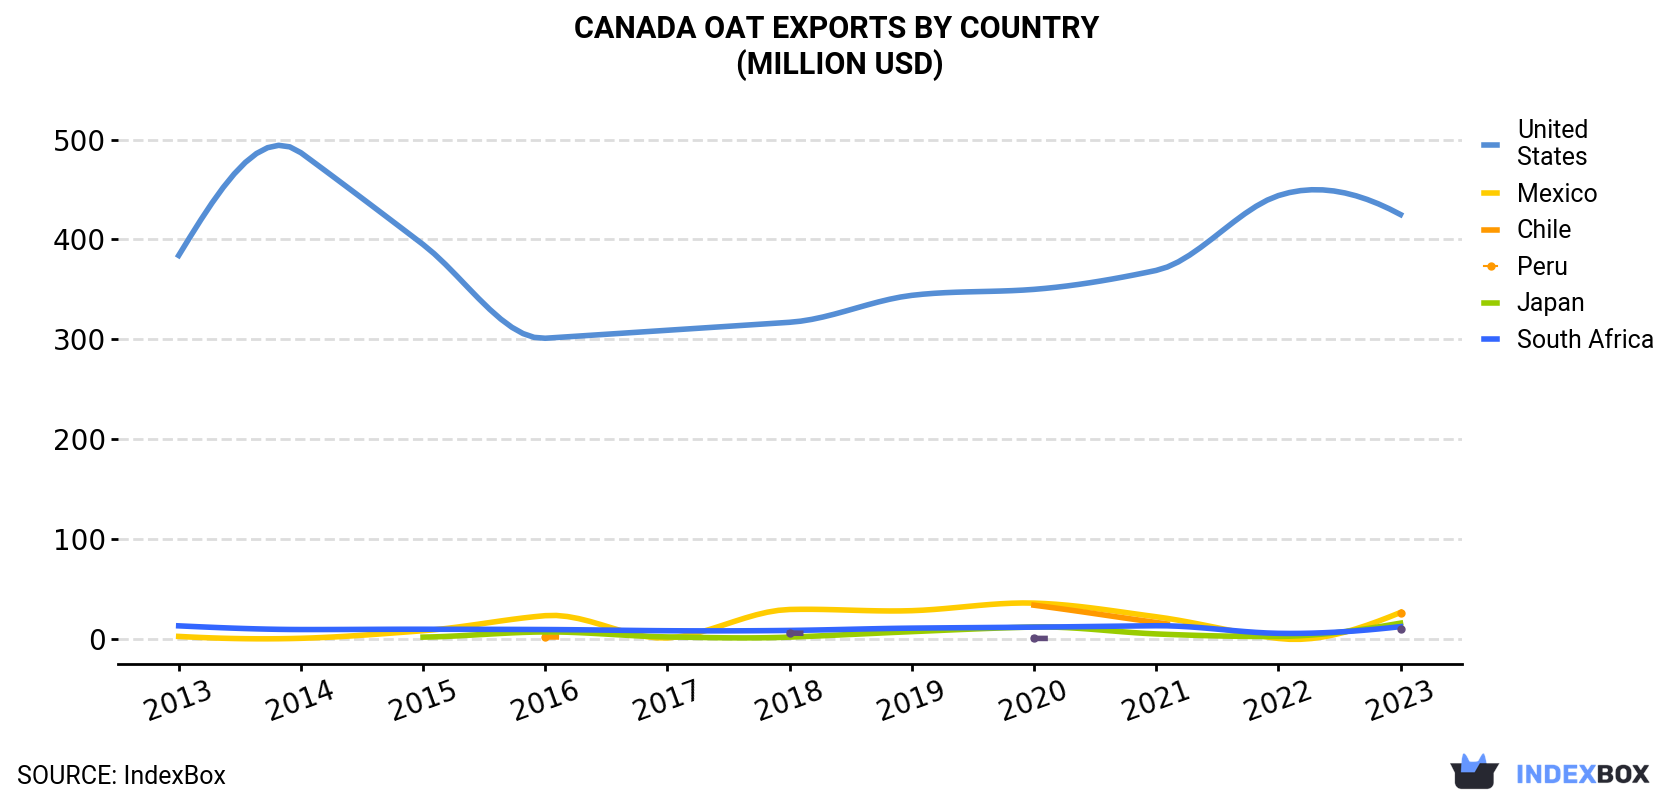 Canada Oat Exports By Country (Million USD)